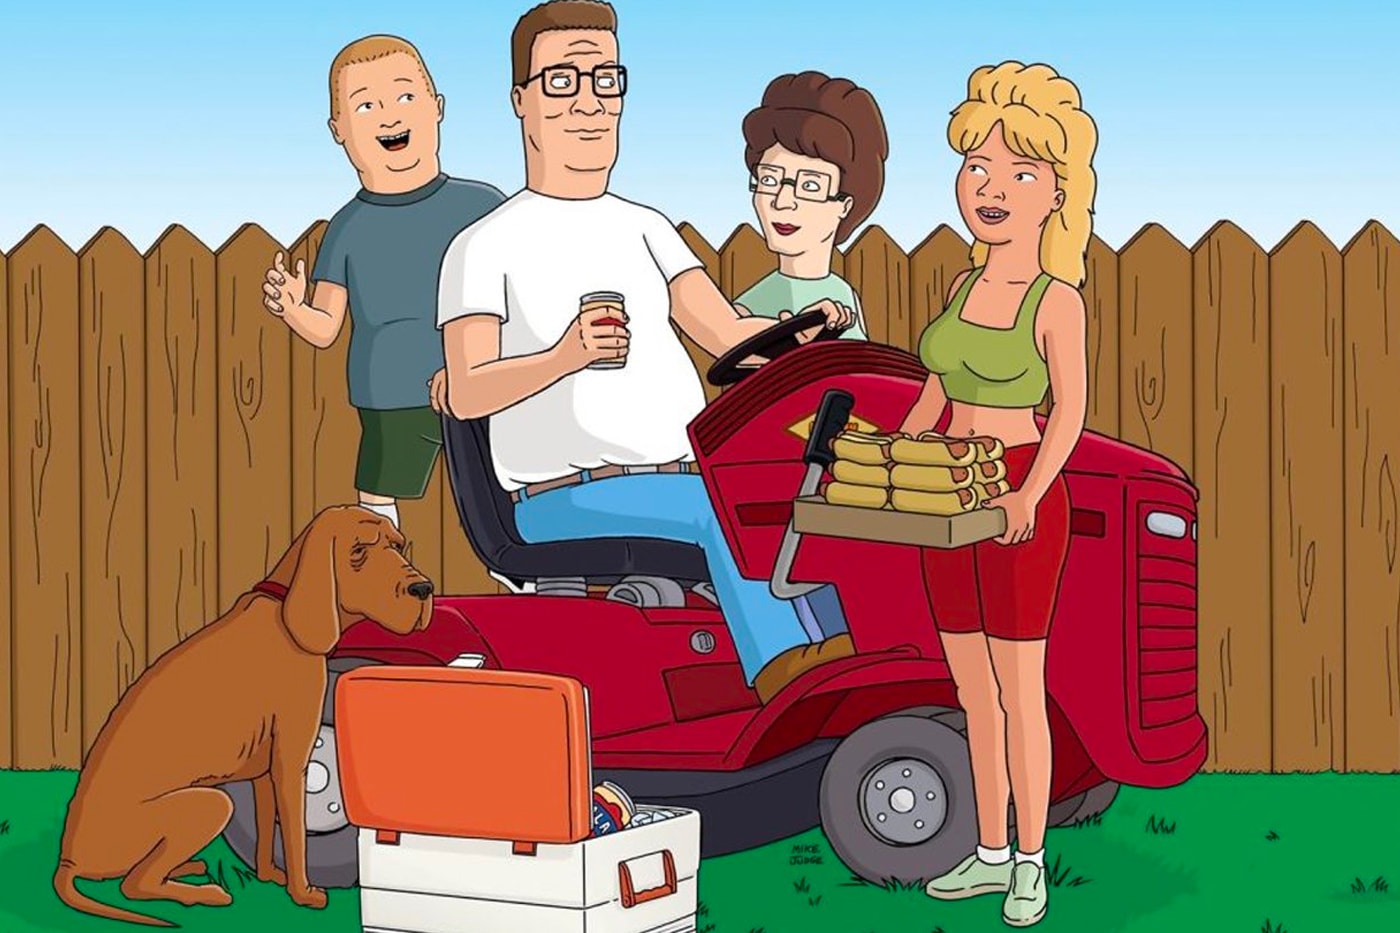 King of the Hill: The Boy Ain't Right (King of the Hill): Hank